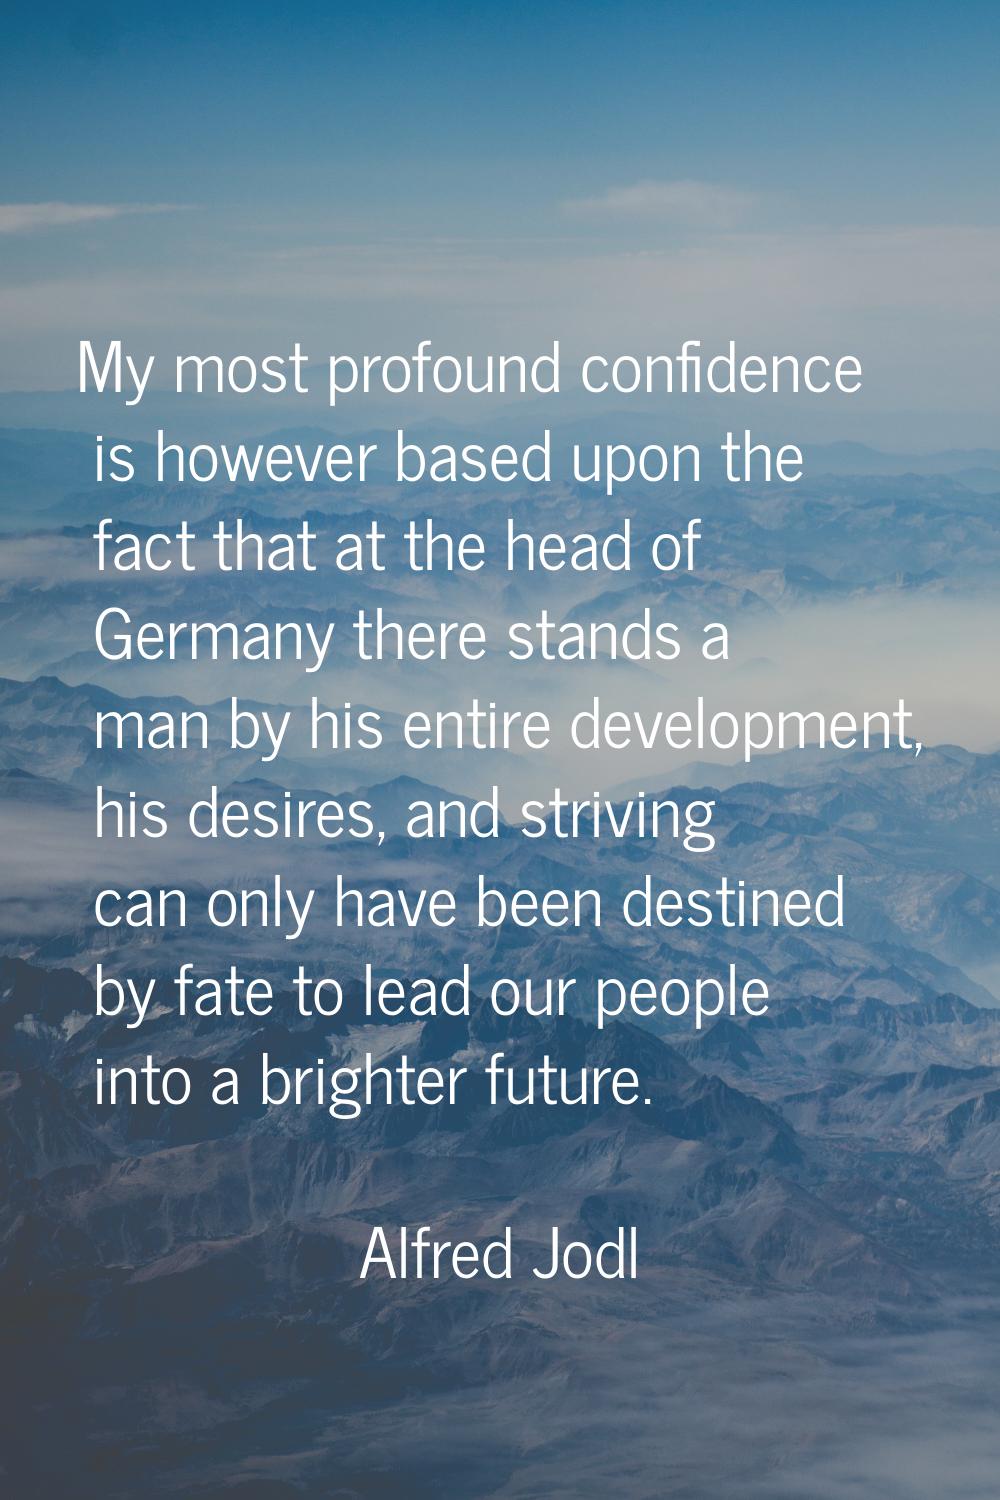 My most profound confidence is however based upon the fact that at the head of Germany there stands